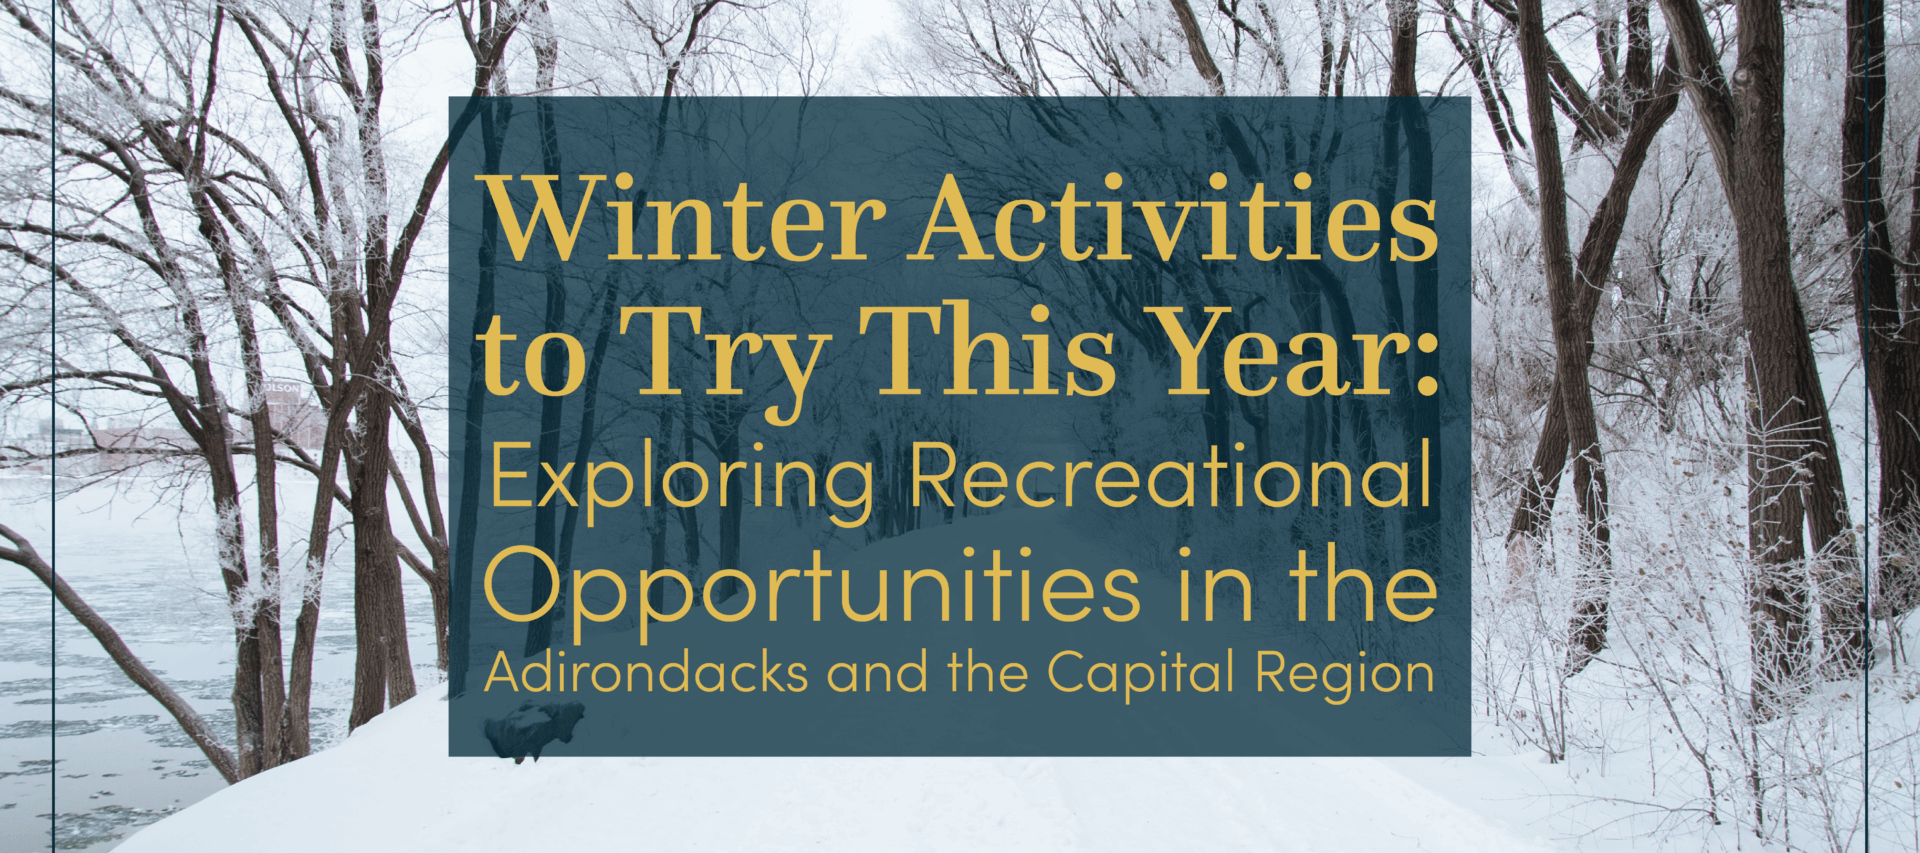 Winter Activities to Try This Year: Exploring Recreational Opportunities in the Adirondacks and the Capital Region